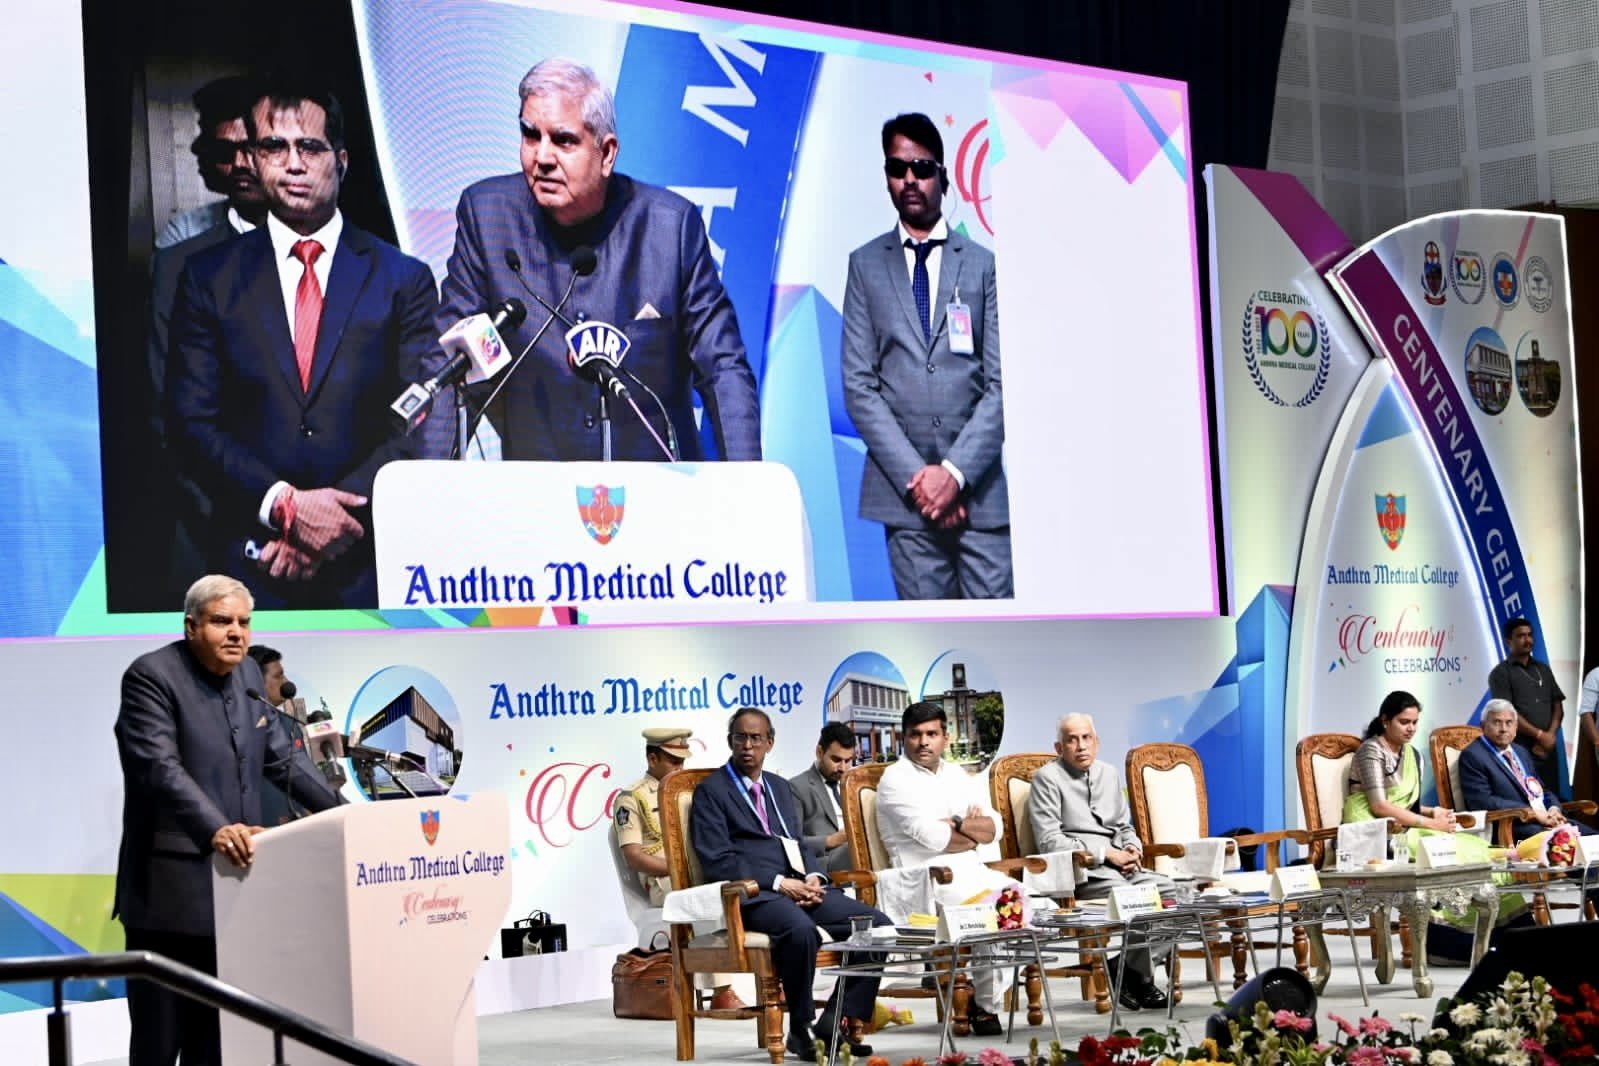 The Vice-President, Shri Jagdeep Dhankhar addressing the gathering during Centenary celebrations of the Andhra Medical College, Visakhapatnam in Andhra Pradesh on October 28, 2023.